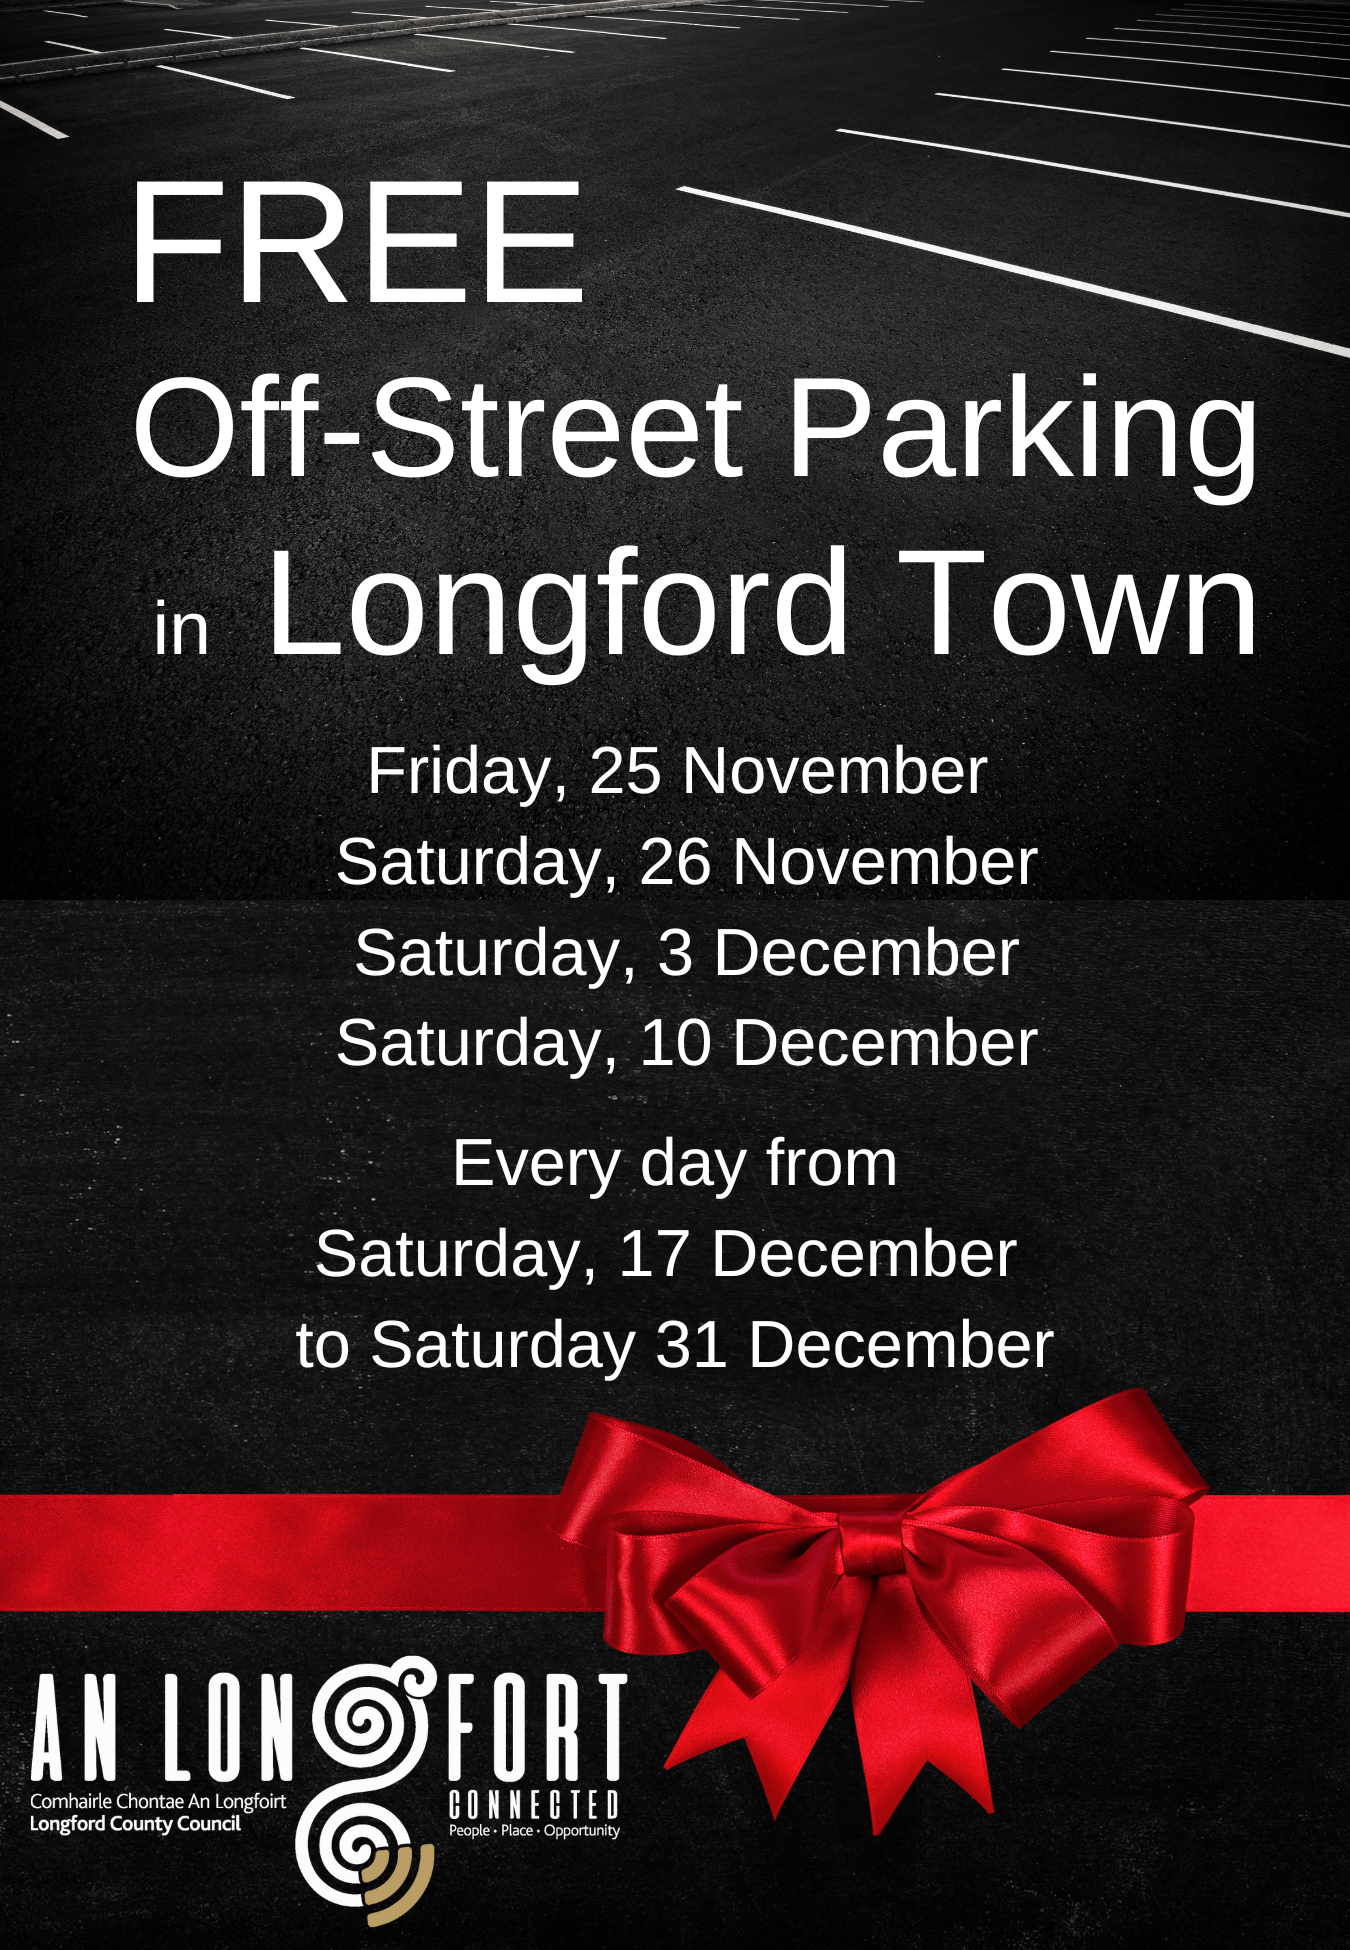 Free off-street parking in Longford Town on Friday, 25 November; Saturday, 26 November; Saturday, 3 December; Saturday, 10 December; and every day from Saturday, 17 December to Saturday, 31 December